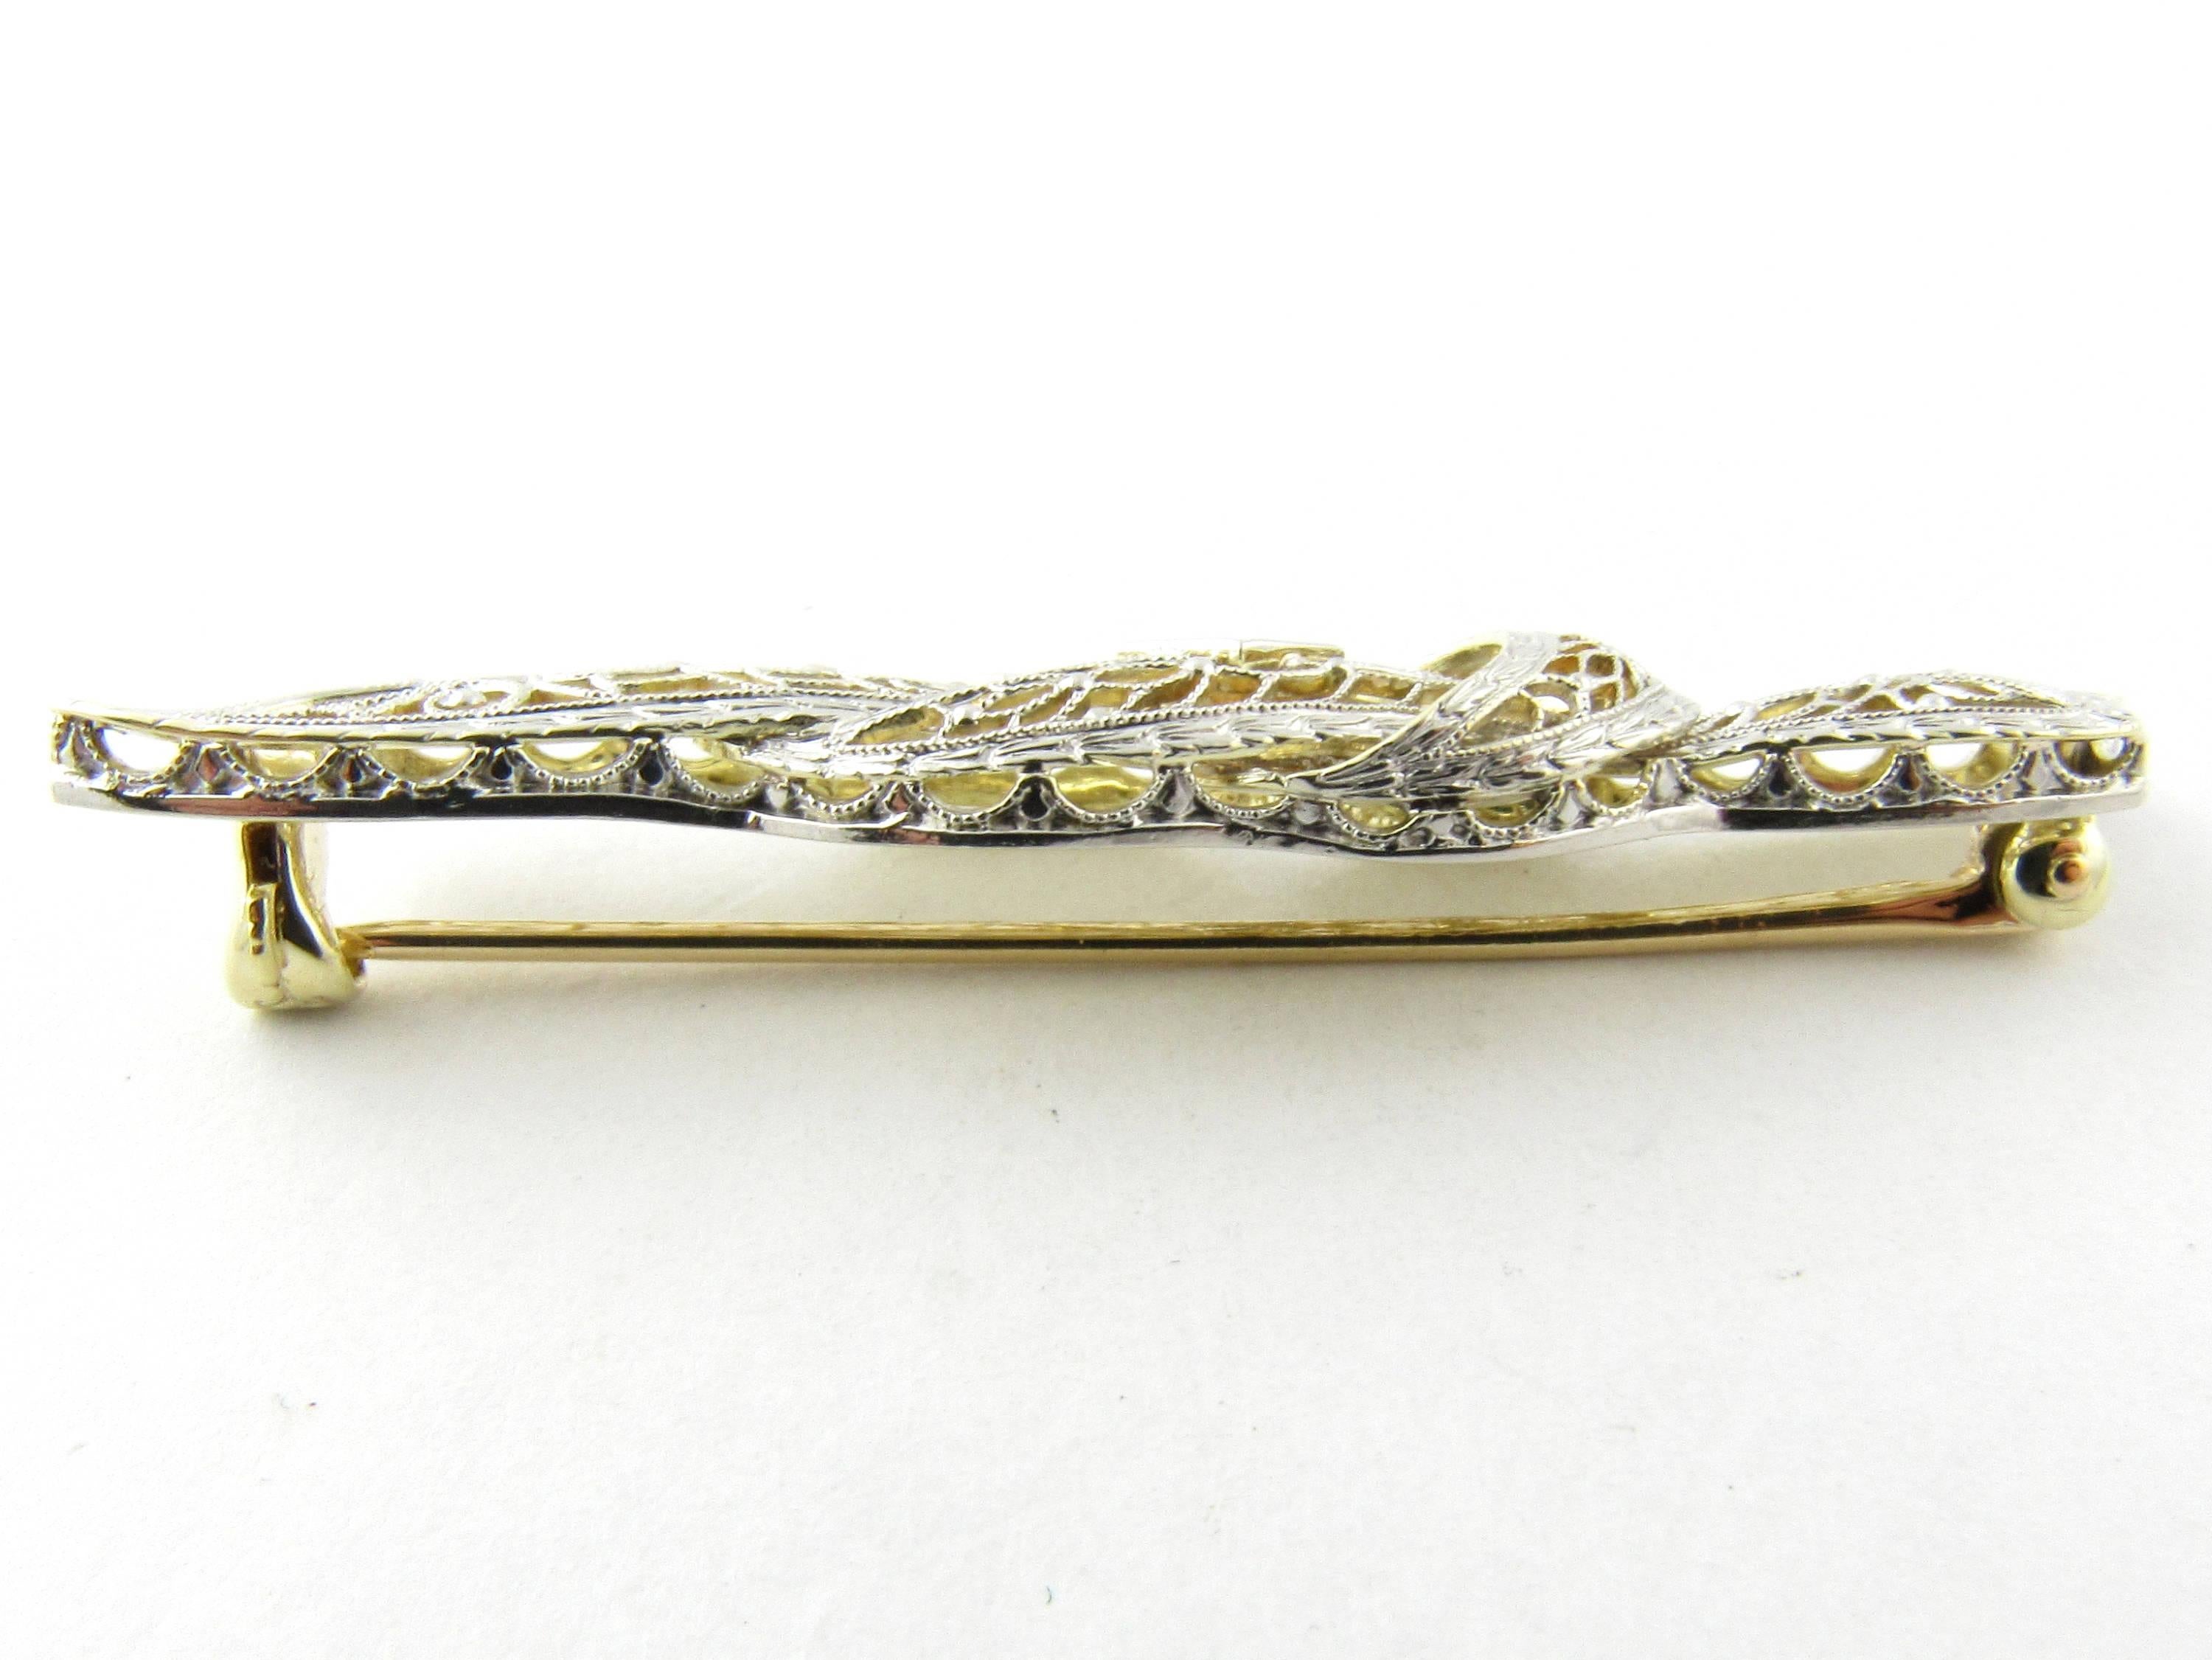 Vintage 14 Karat White and Yellow Gold and Diamond Brooch/Pin-

This exquisite brooch features a delicate white and yellow filigree bow accented with one round brilliant cut diamond. Back of the brooch is yellow gold

Approximate total diamond